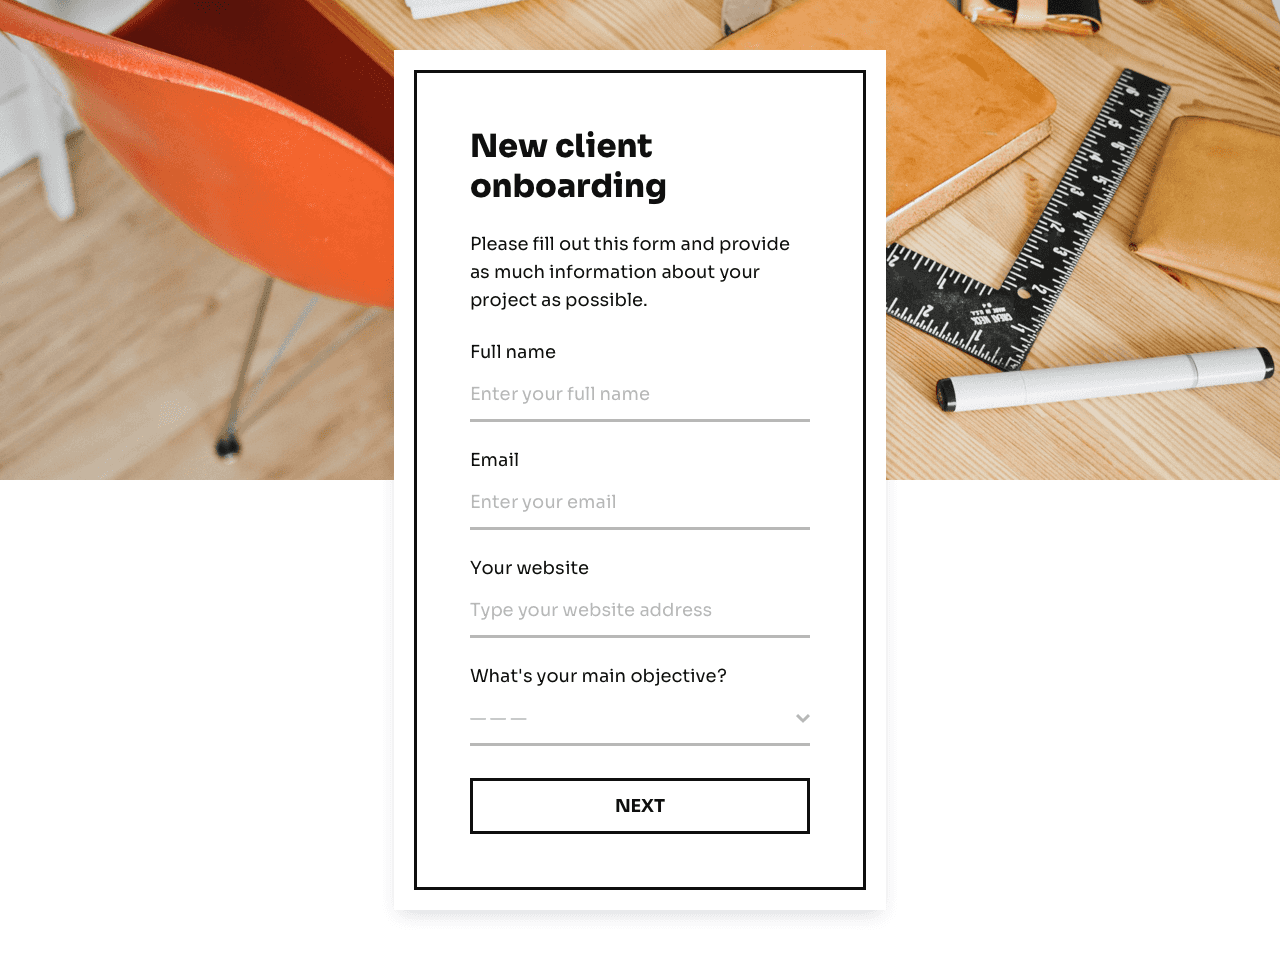 New client onboarding questionnaire example powered by Getform